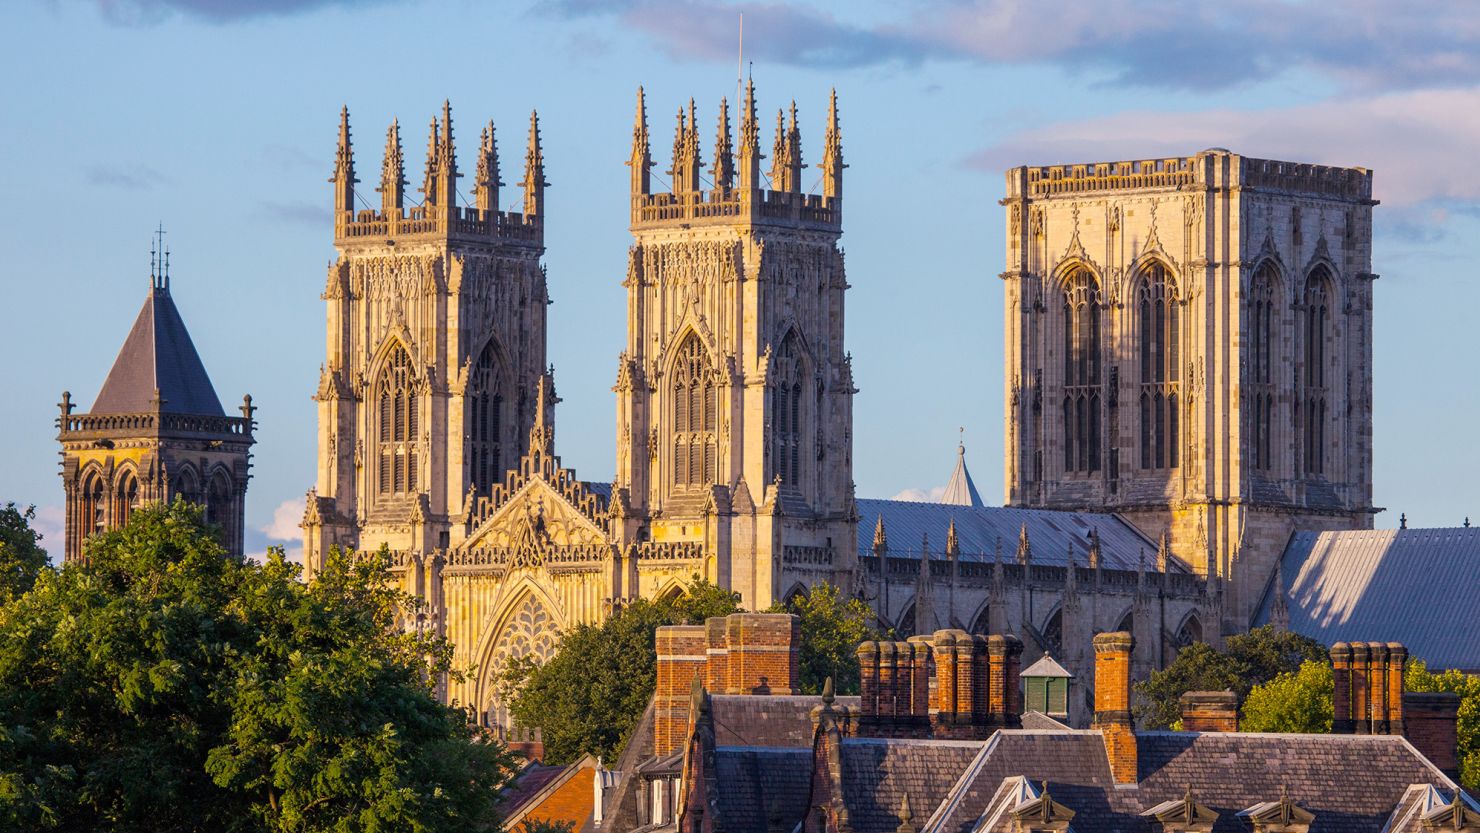 York Minster is the largest Gothic church in England and was constructed between the 13th and 15th centuries.